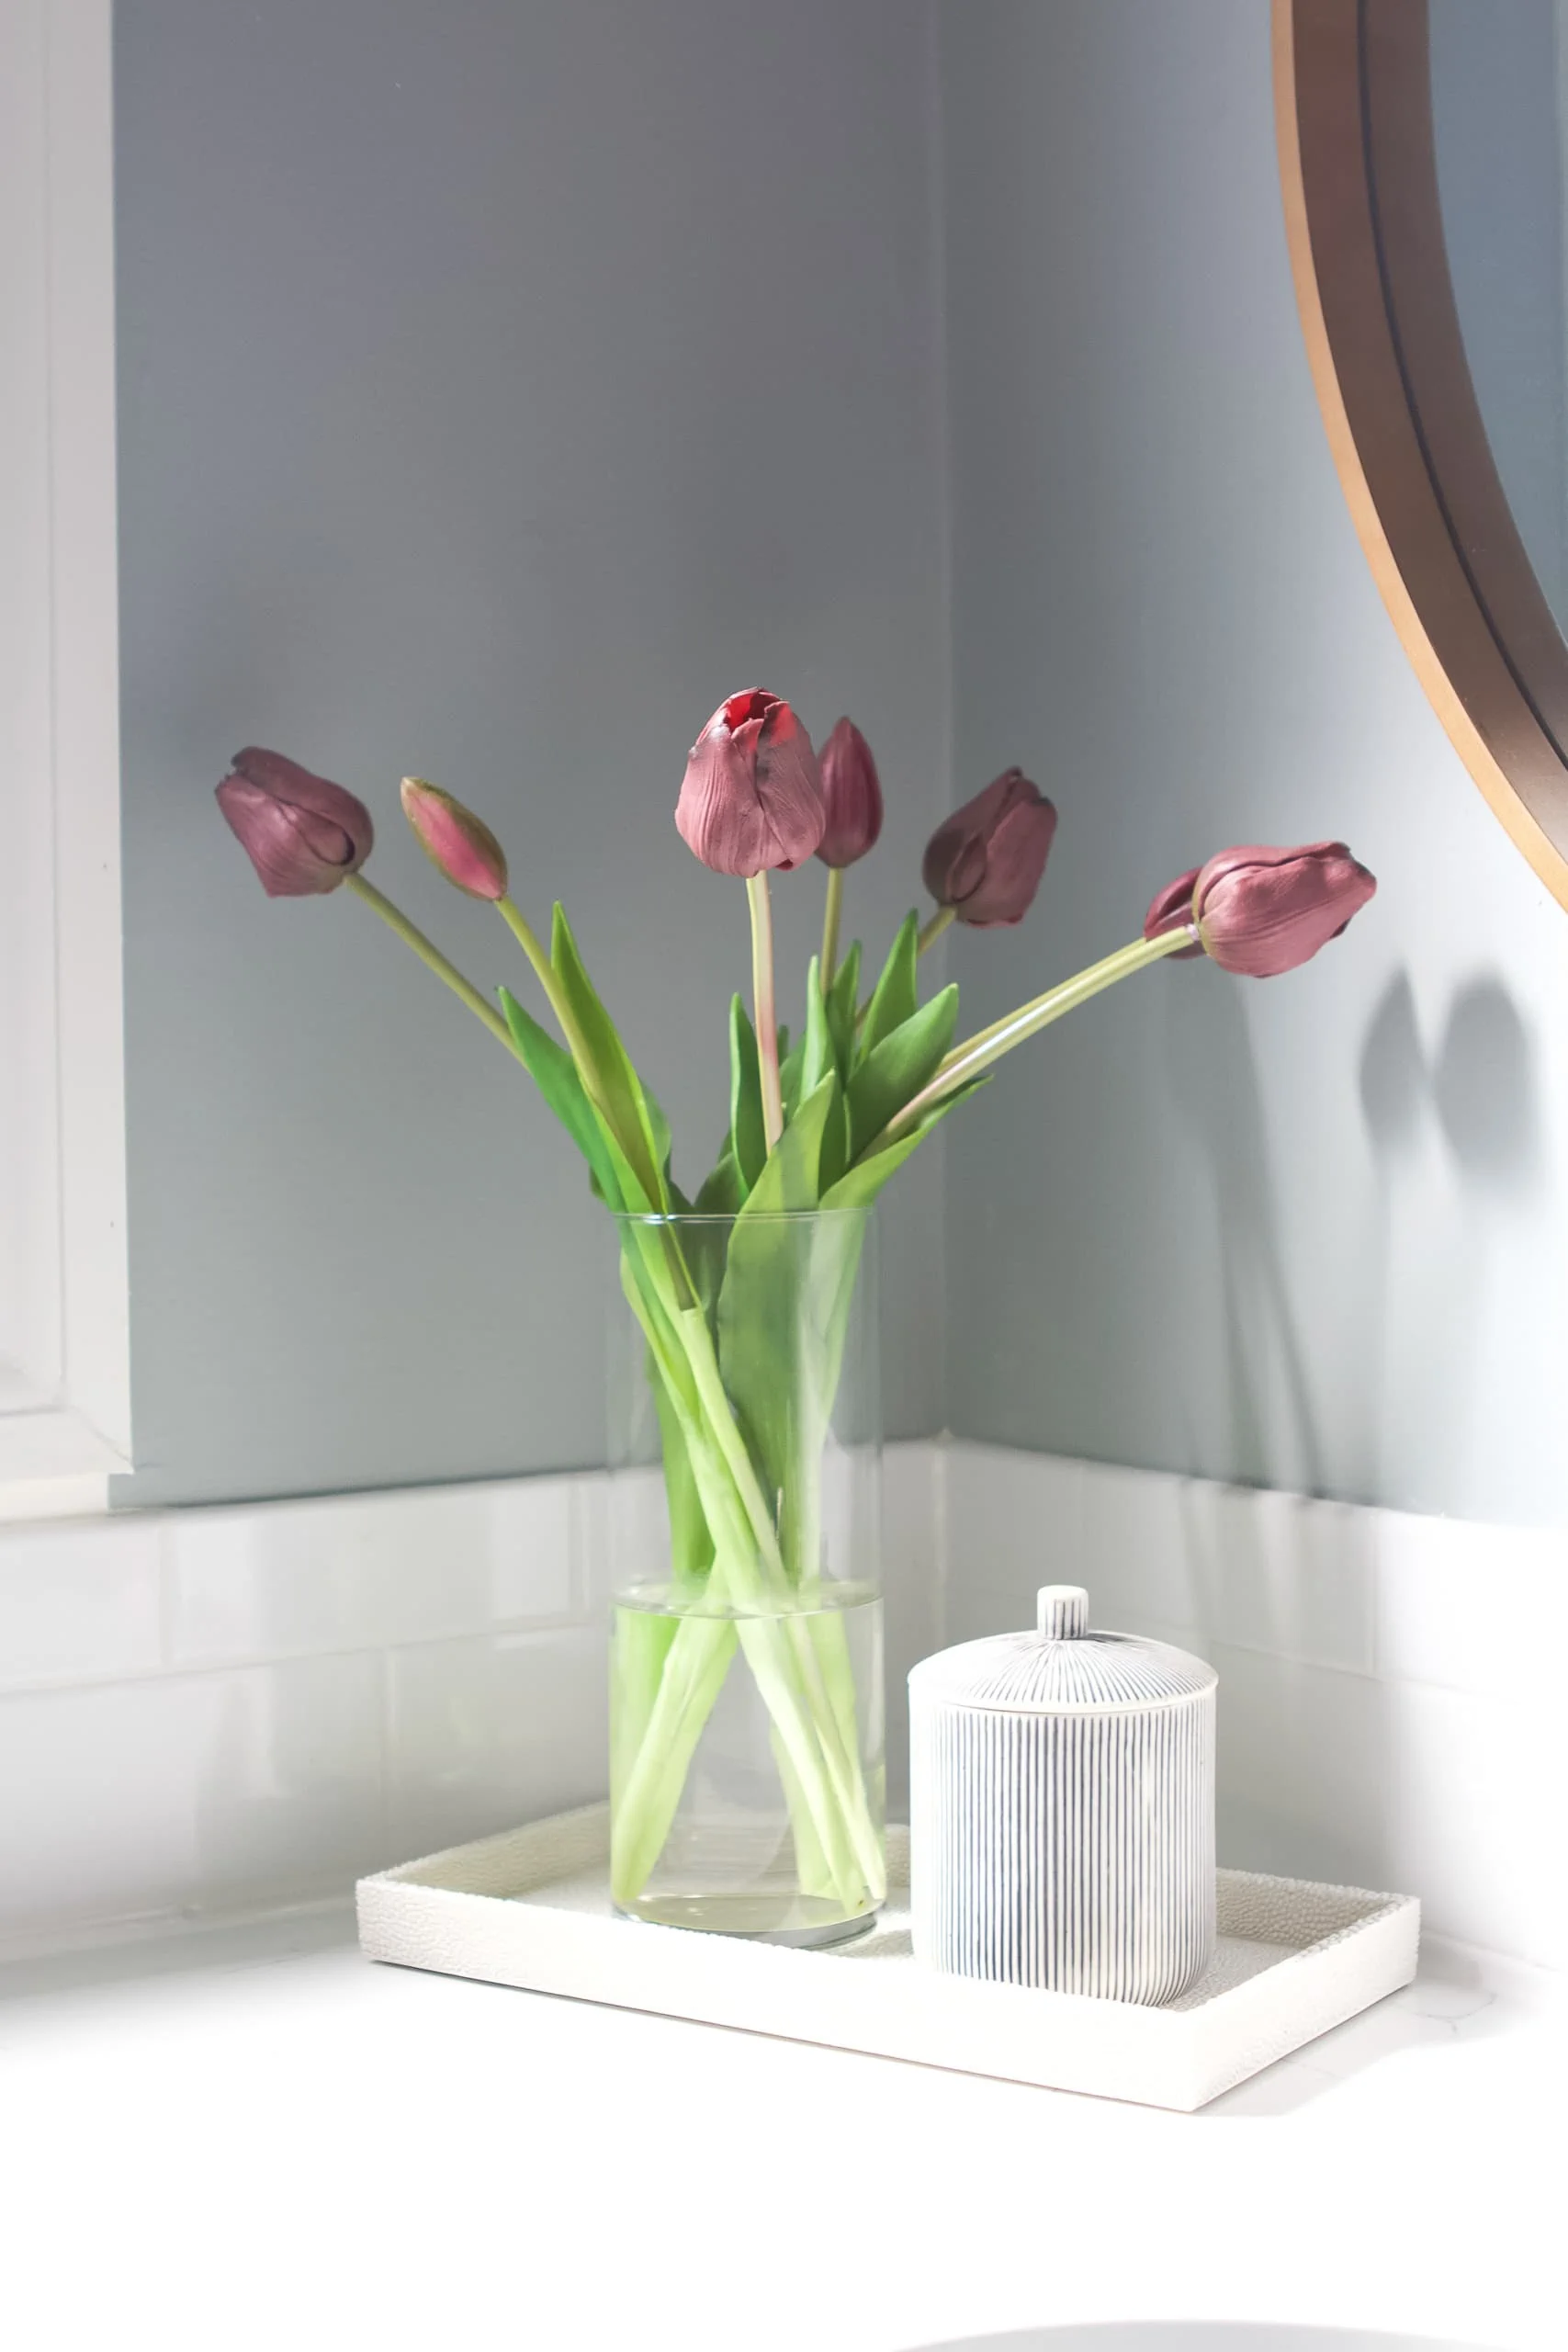 Faux tulips in a tray on top of a bathroom counter